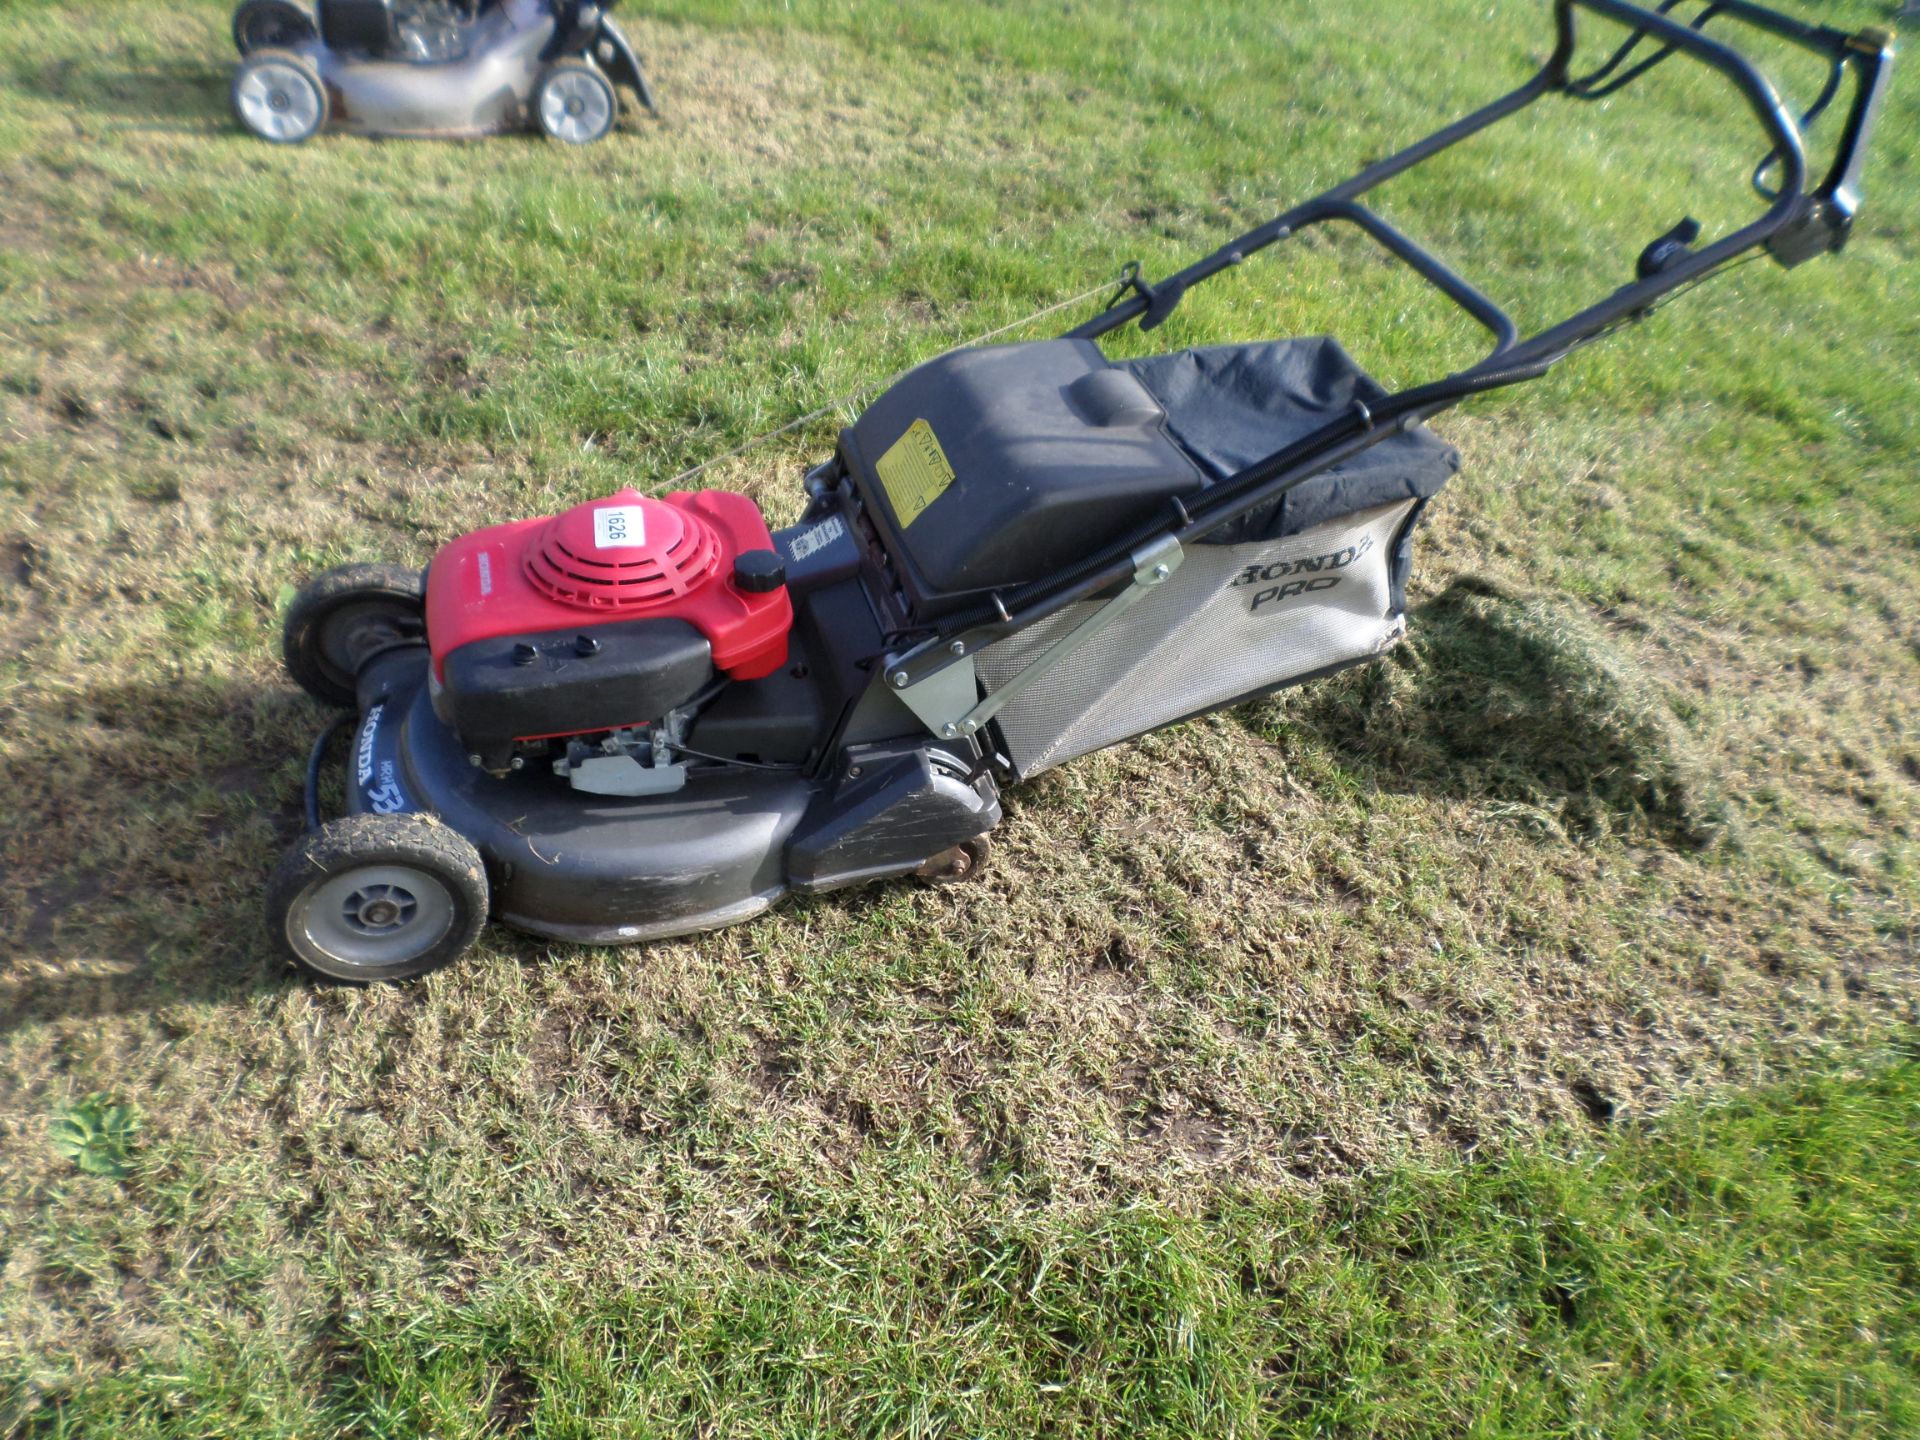 Honda HRH536 Pro roller rotary mower with grass bag, used this season but not serviced